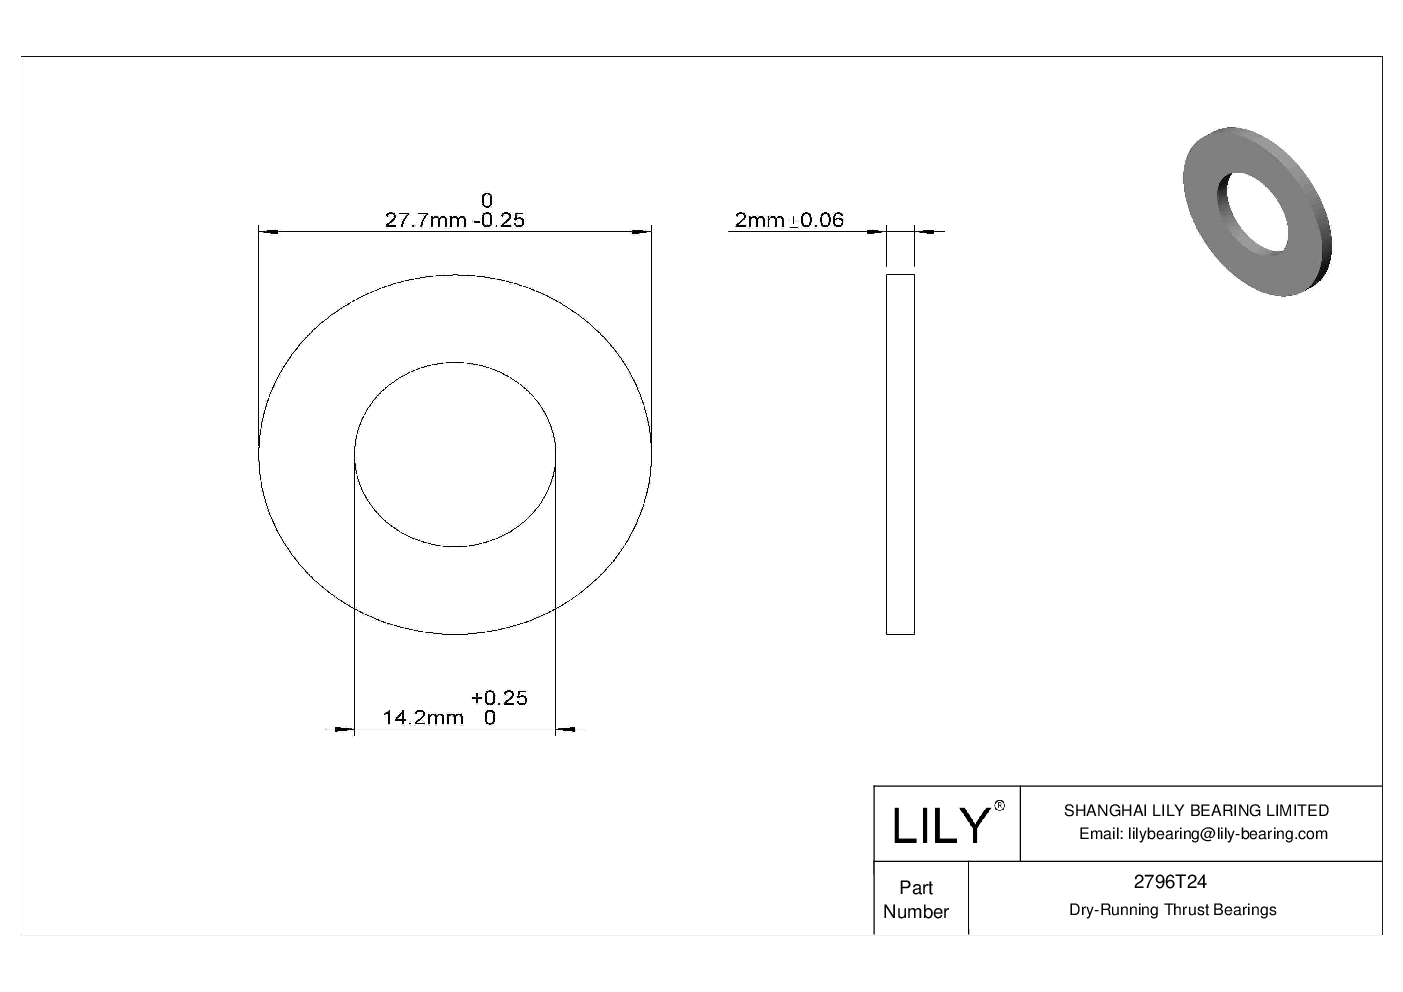 CHJGTCE Ultra-Low-Friction Dry-Running Thrust Bearings cad drawing